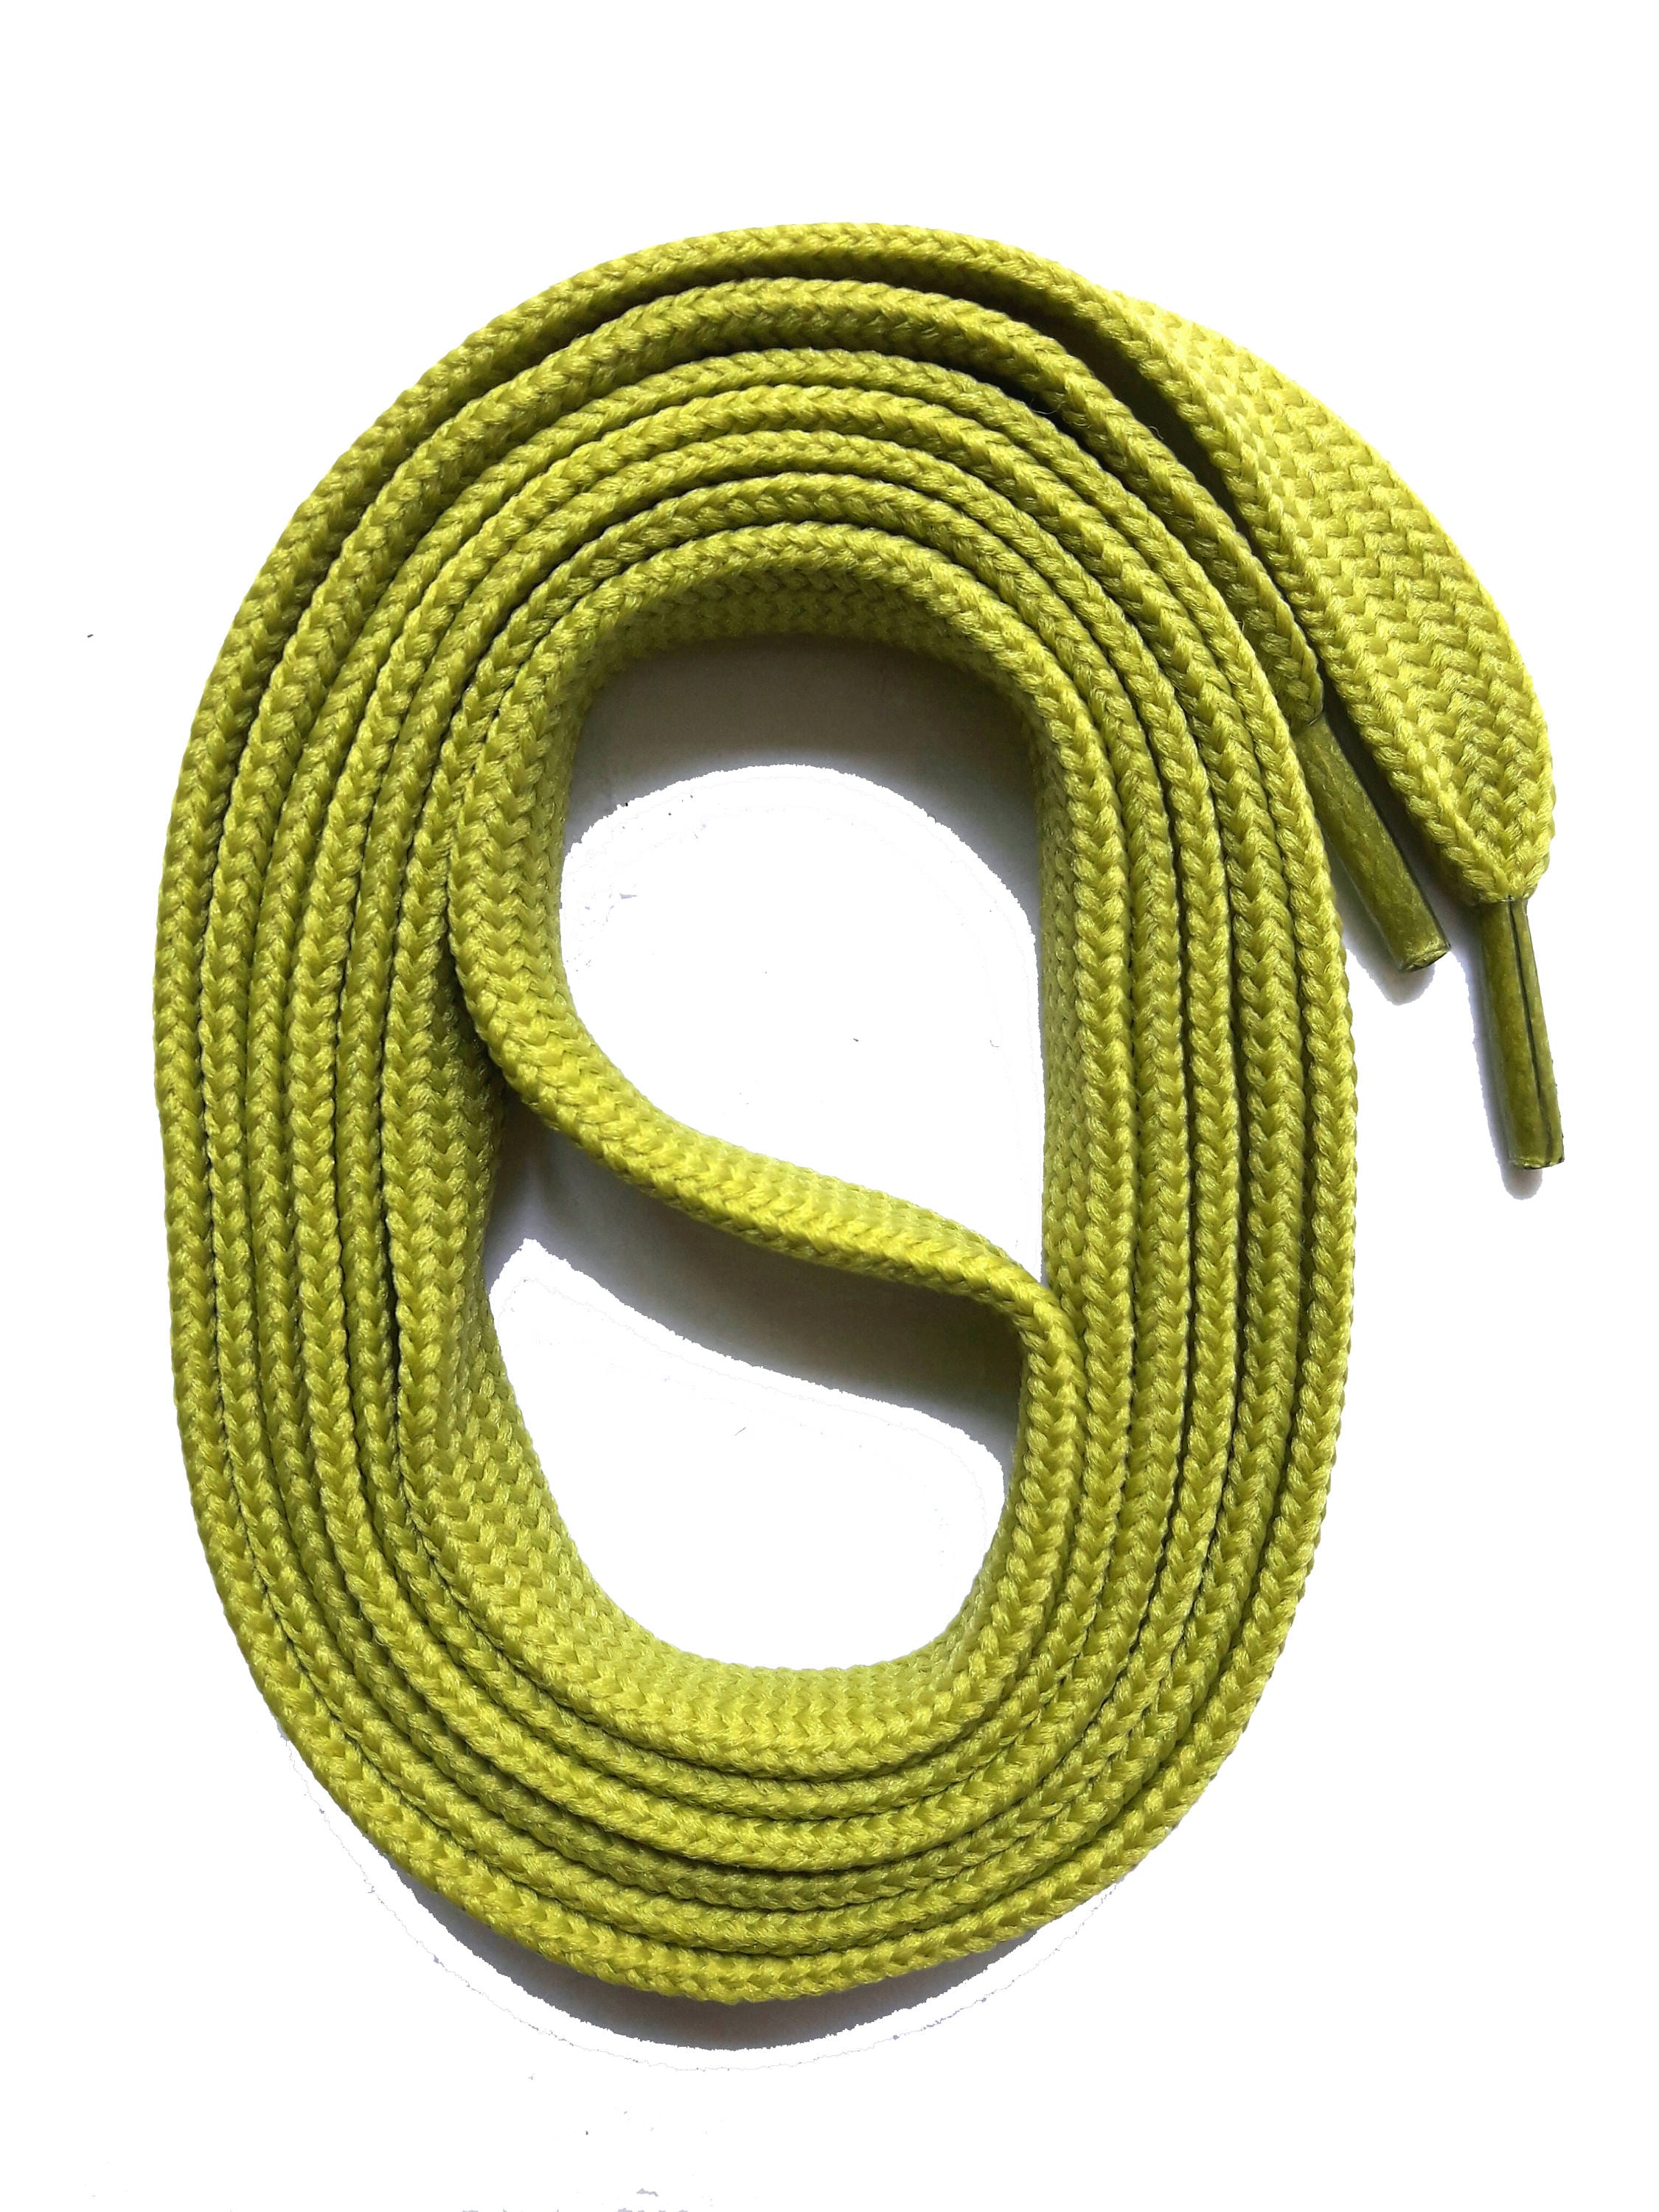 SAFETY OUTDOOR SHOELACES 4 Lengths SNORS shoefriends DARK GREEN / OLIVE